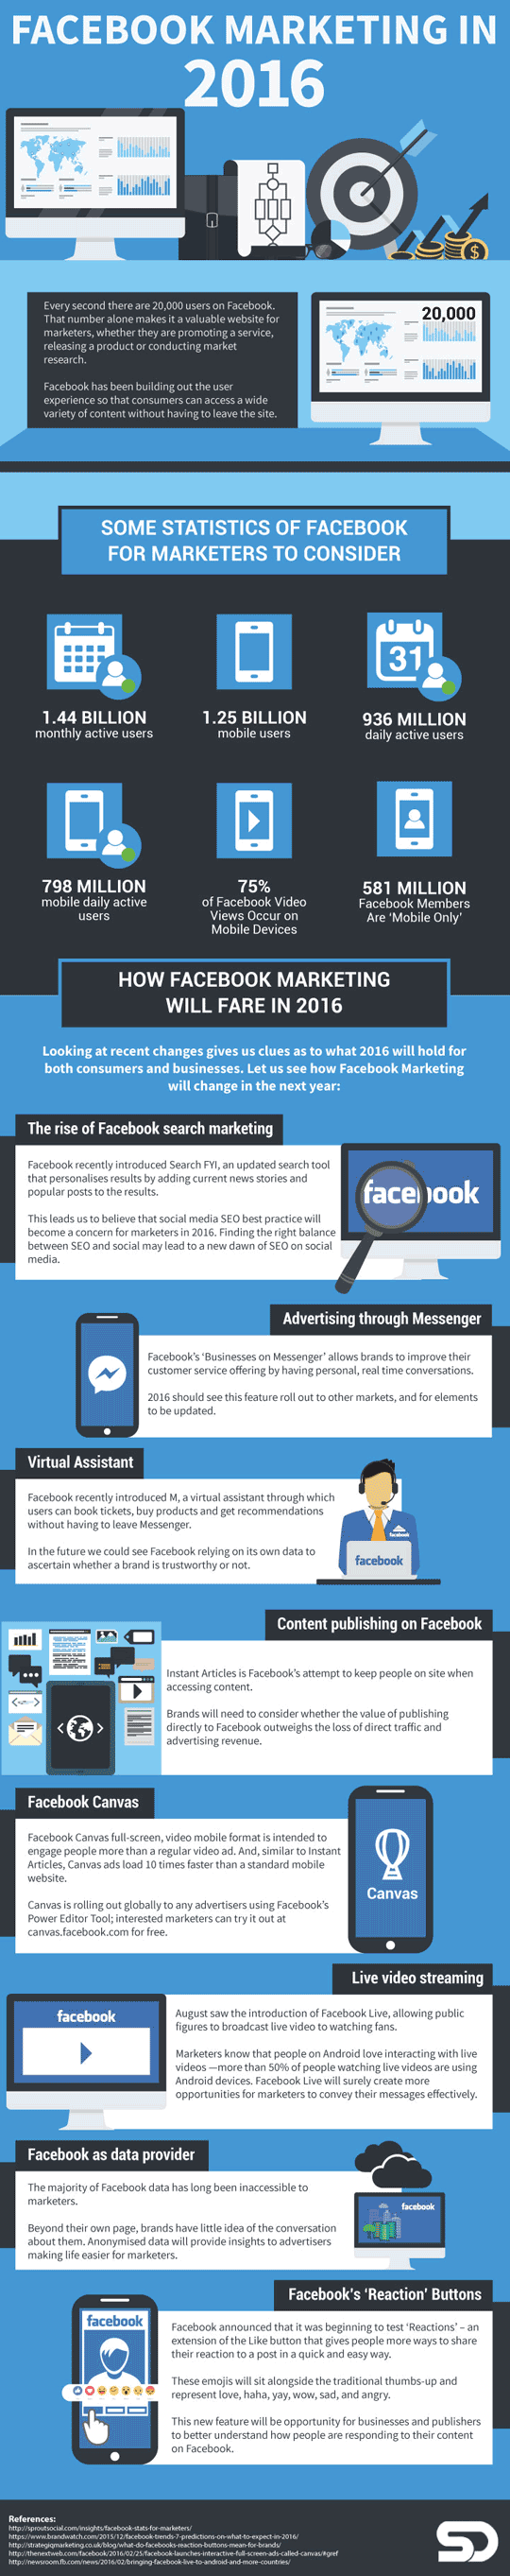 How Facebook Marketing Is Changing in 2016 #Infographic